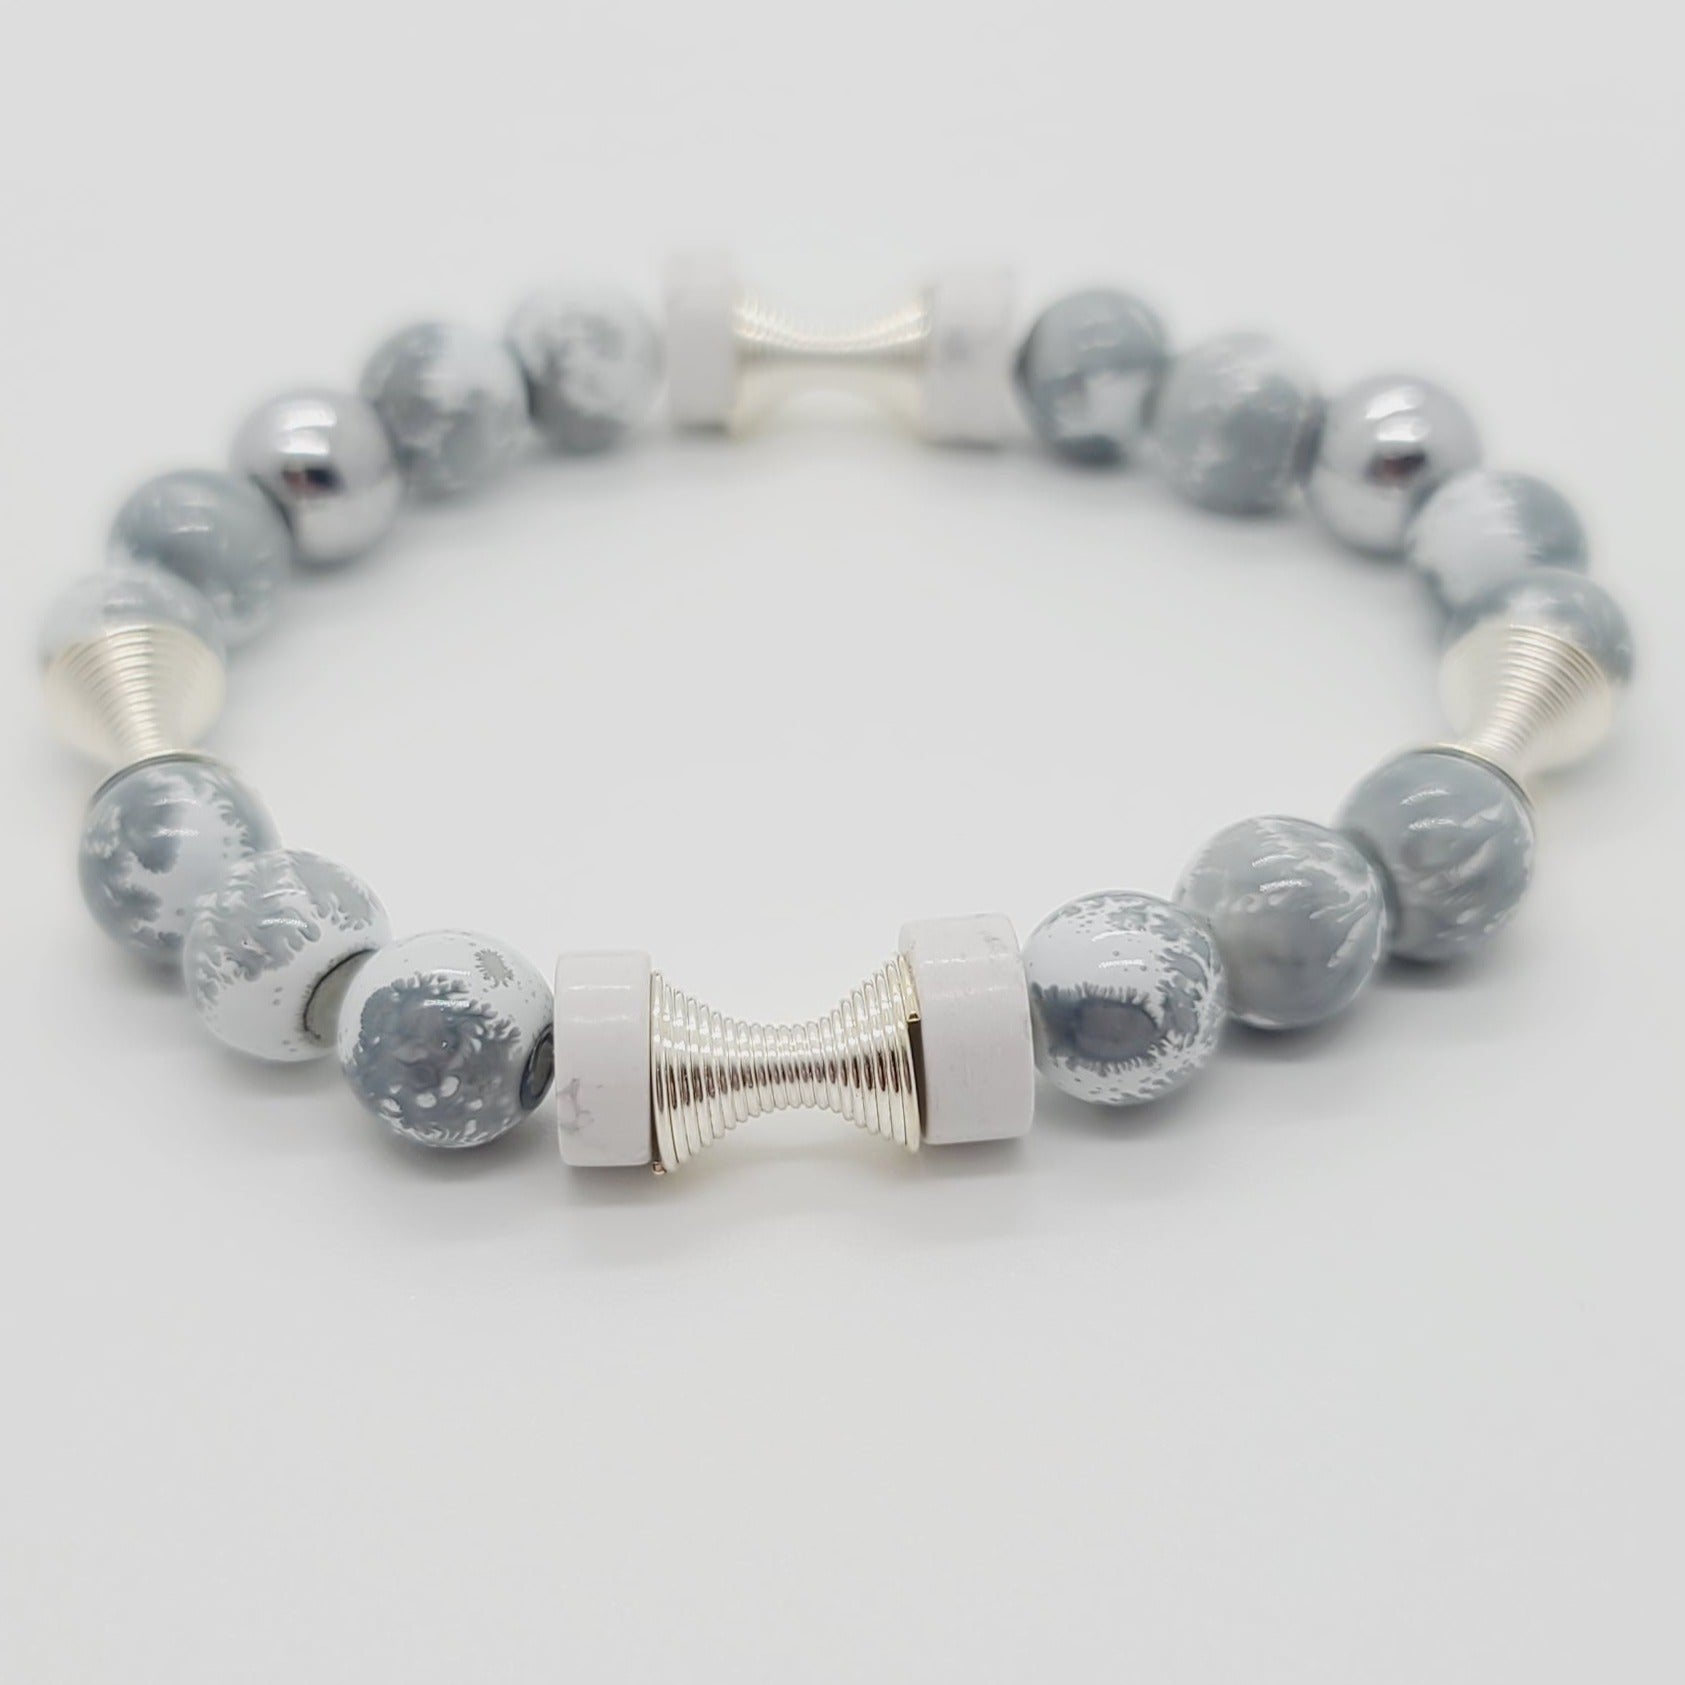 Length: 7.5 inches | Weight: 0.9 ounces  Distinctly You! This bracelet is made with 10mm grey and white glass beads,10mm chrome beads, silver spring charms, and ceramic spacers.